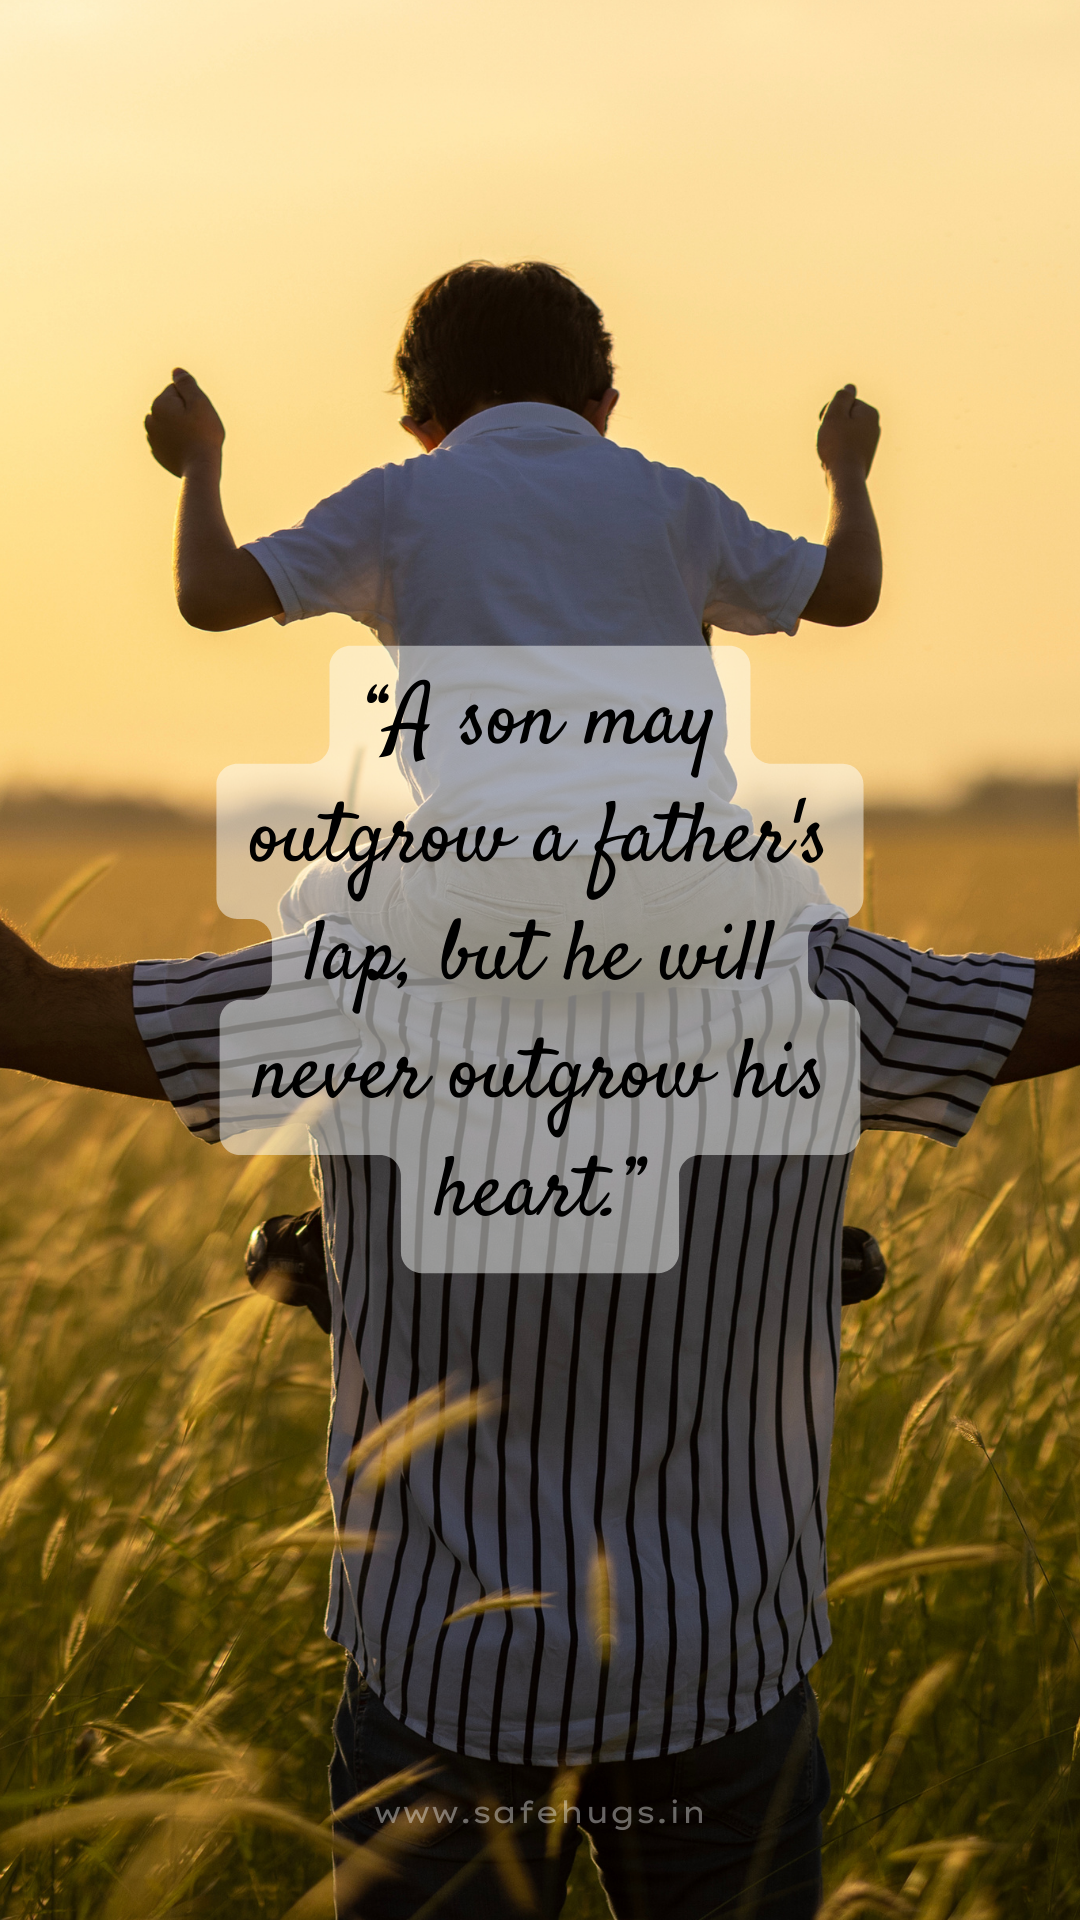 Quote: 'A son may outgrow a father's lap, but he will never outgrow his heart.'